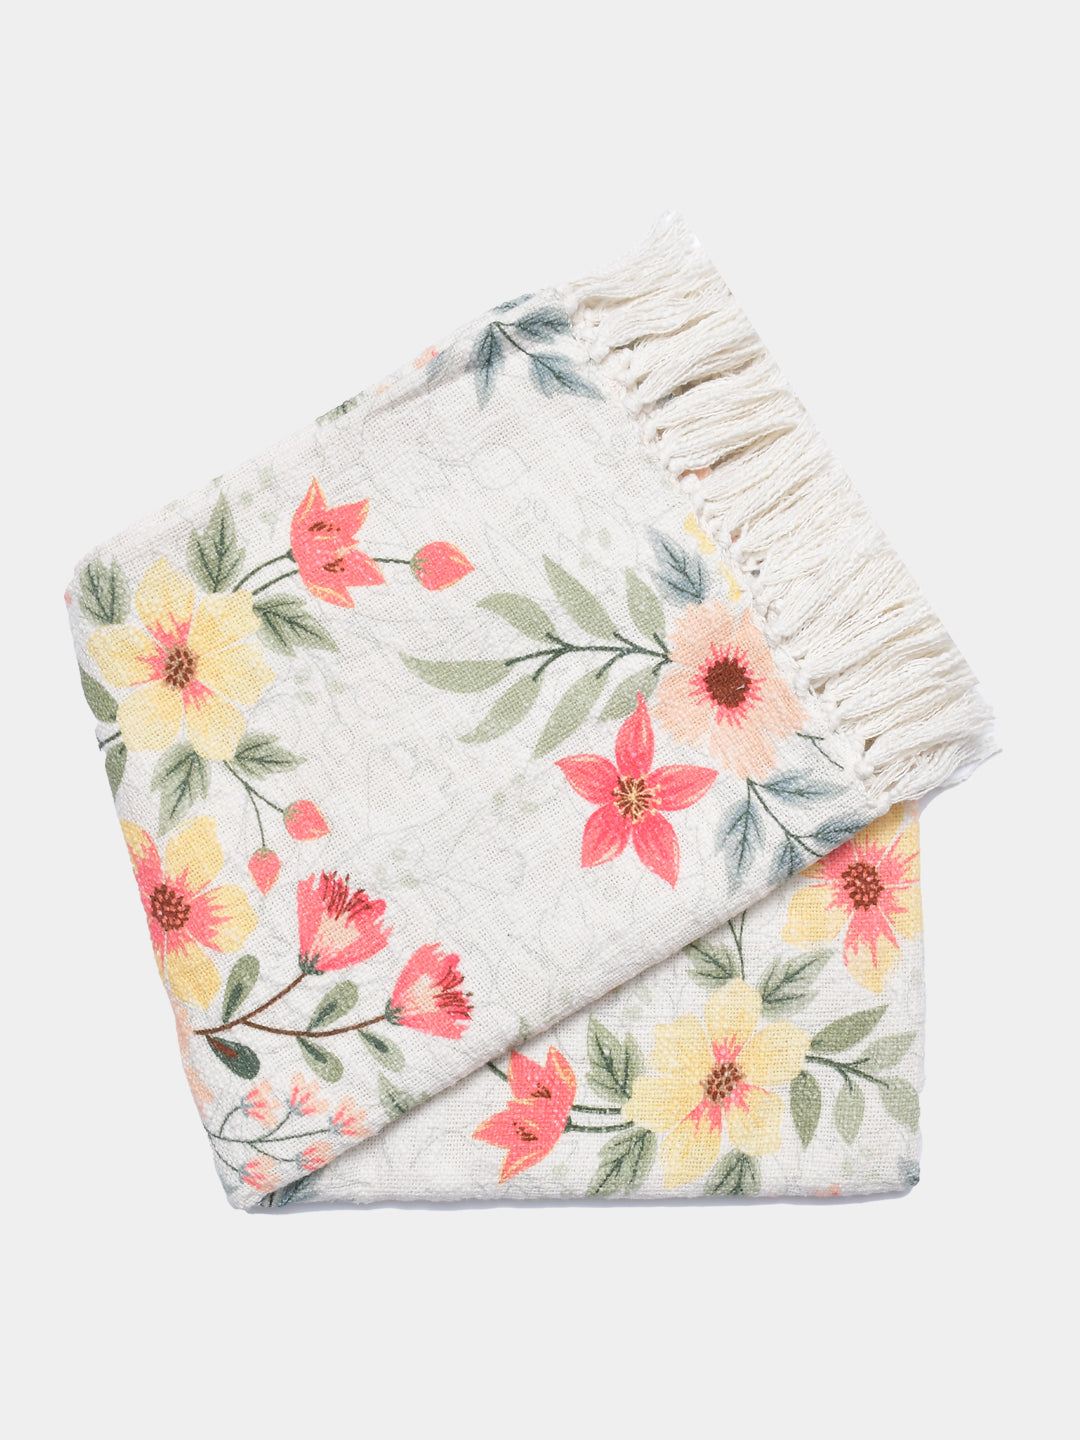 Blossom Cotton Printed Throw with Cushion Cover